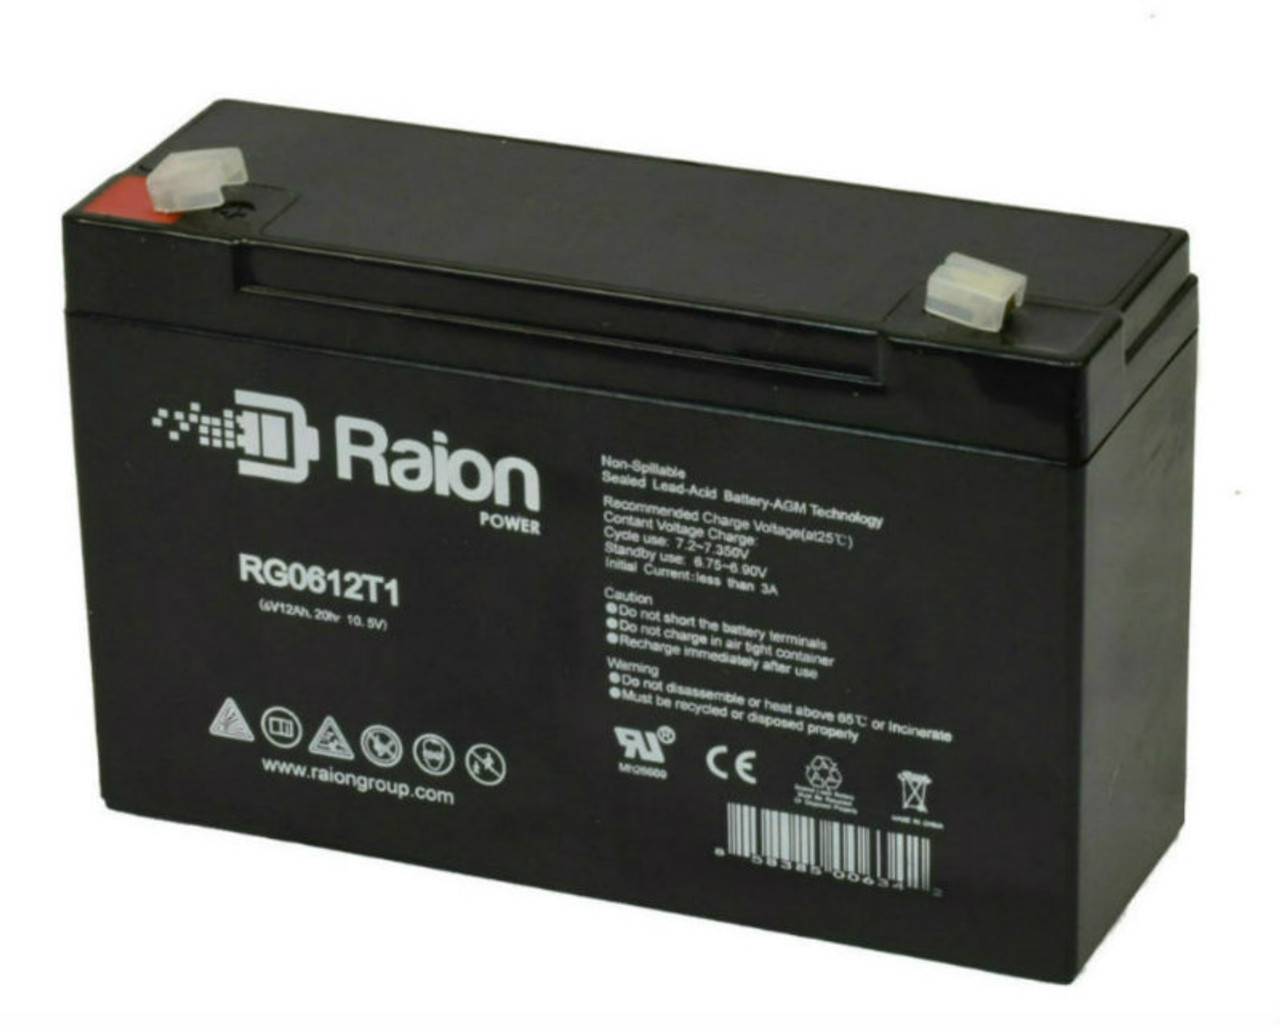 Raion Power RG06120T1 Replacement Emergency Light Battery for Sure-Lites LM1